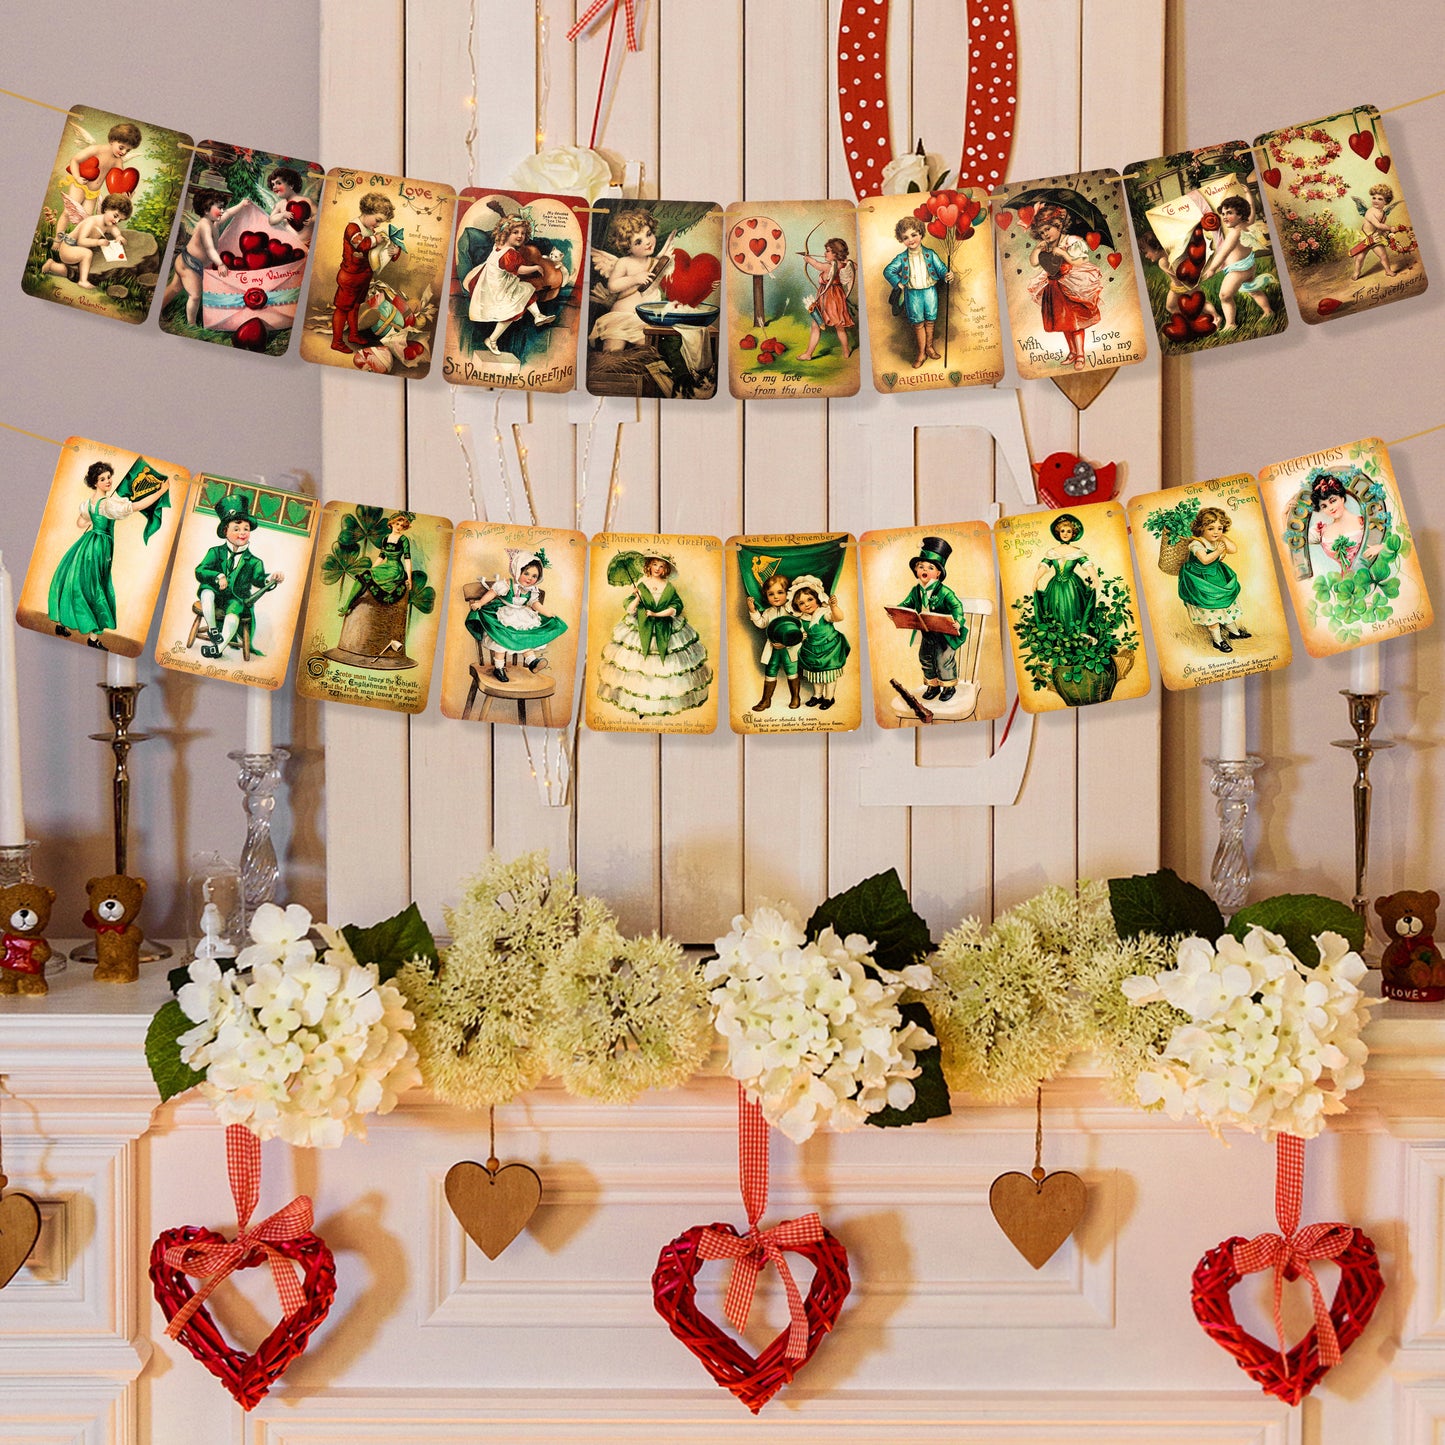 2 Vintage Style Valentine's Day St. Patricks Day Hanging Banner, Party Supplies Hanging Garland Ornaments Cupid Clover Decorations, Valentine Irish Day Sign for Holiday Party Home Wall Window Decor